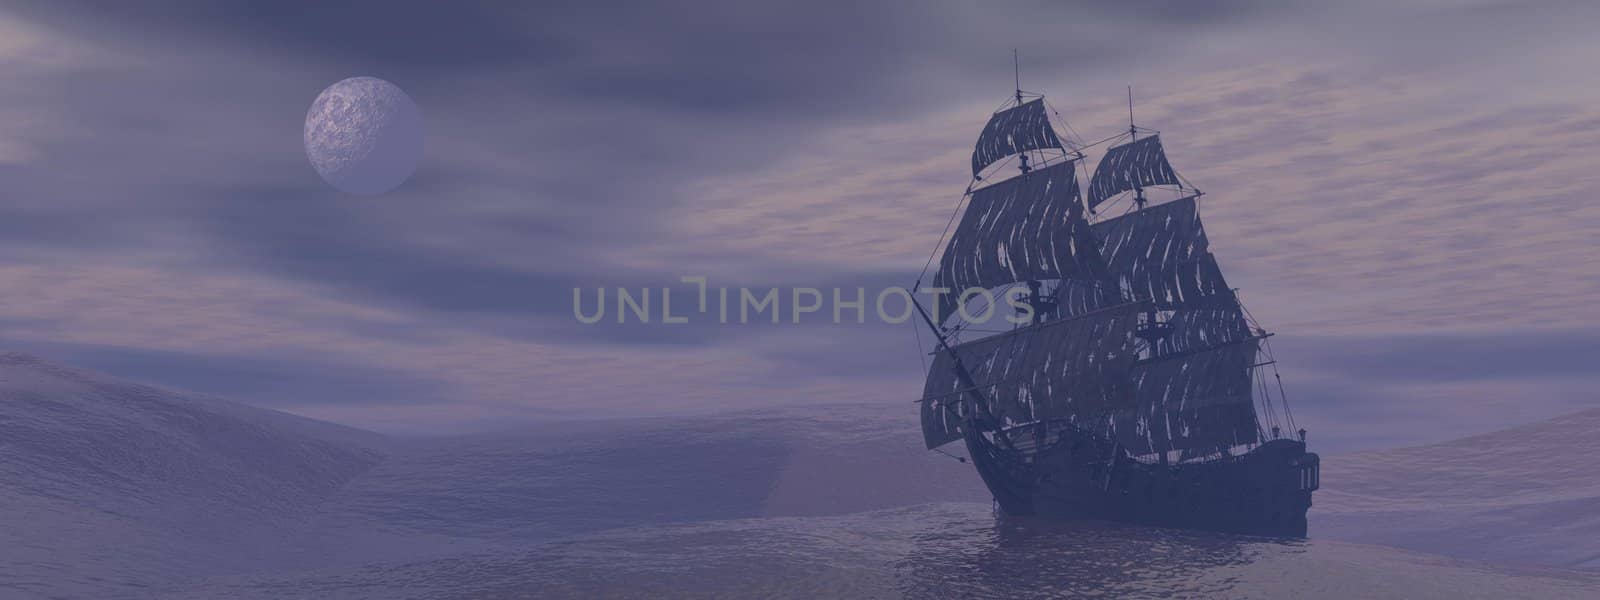 Ghost boat by night - 3D render by Elenaphotos21